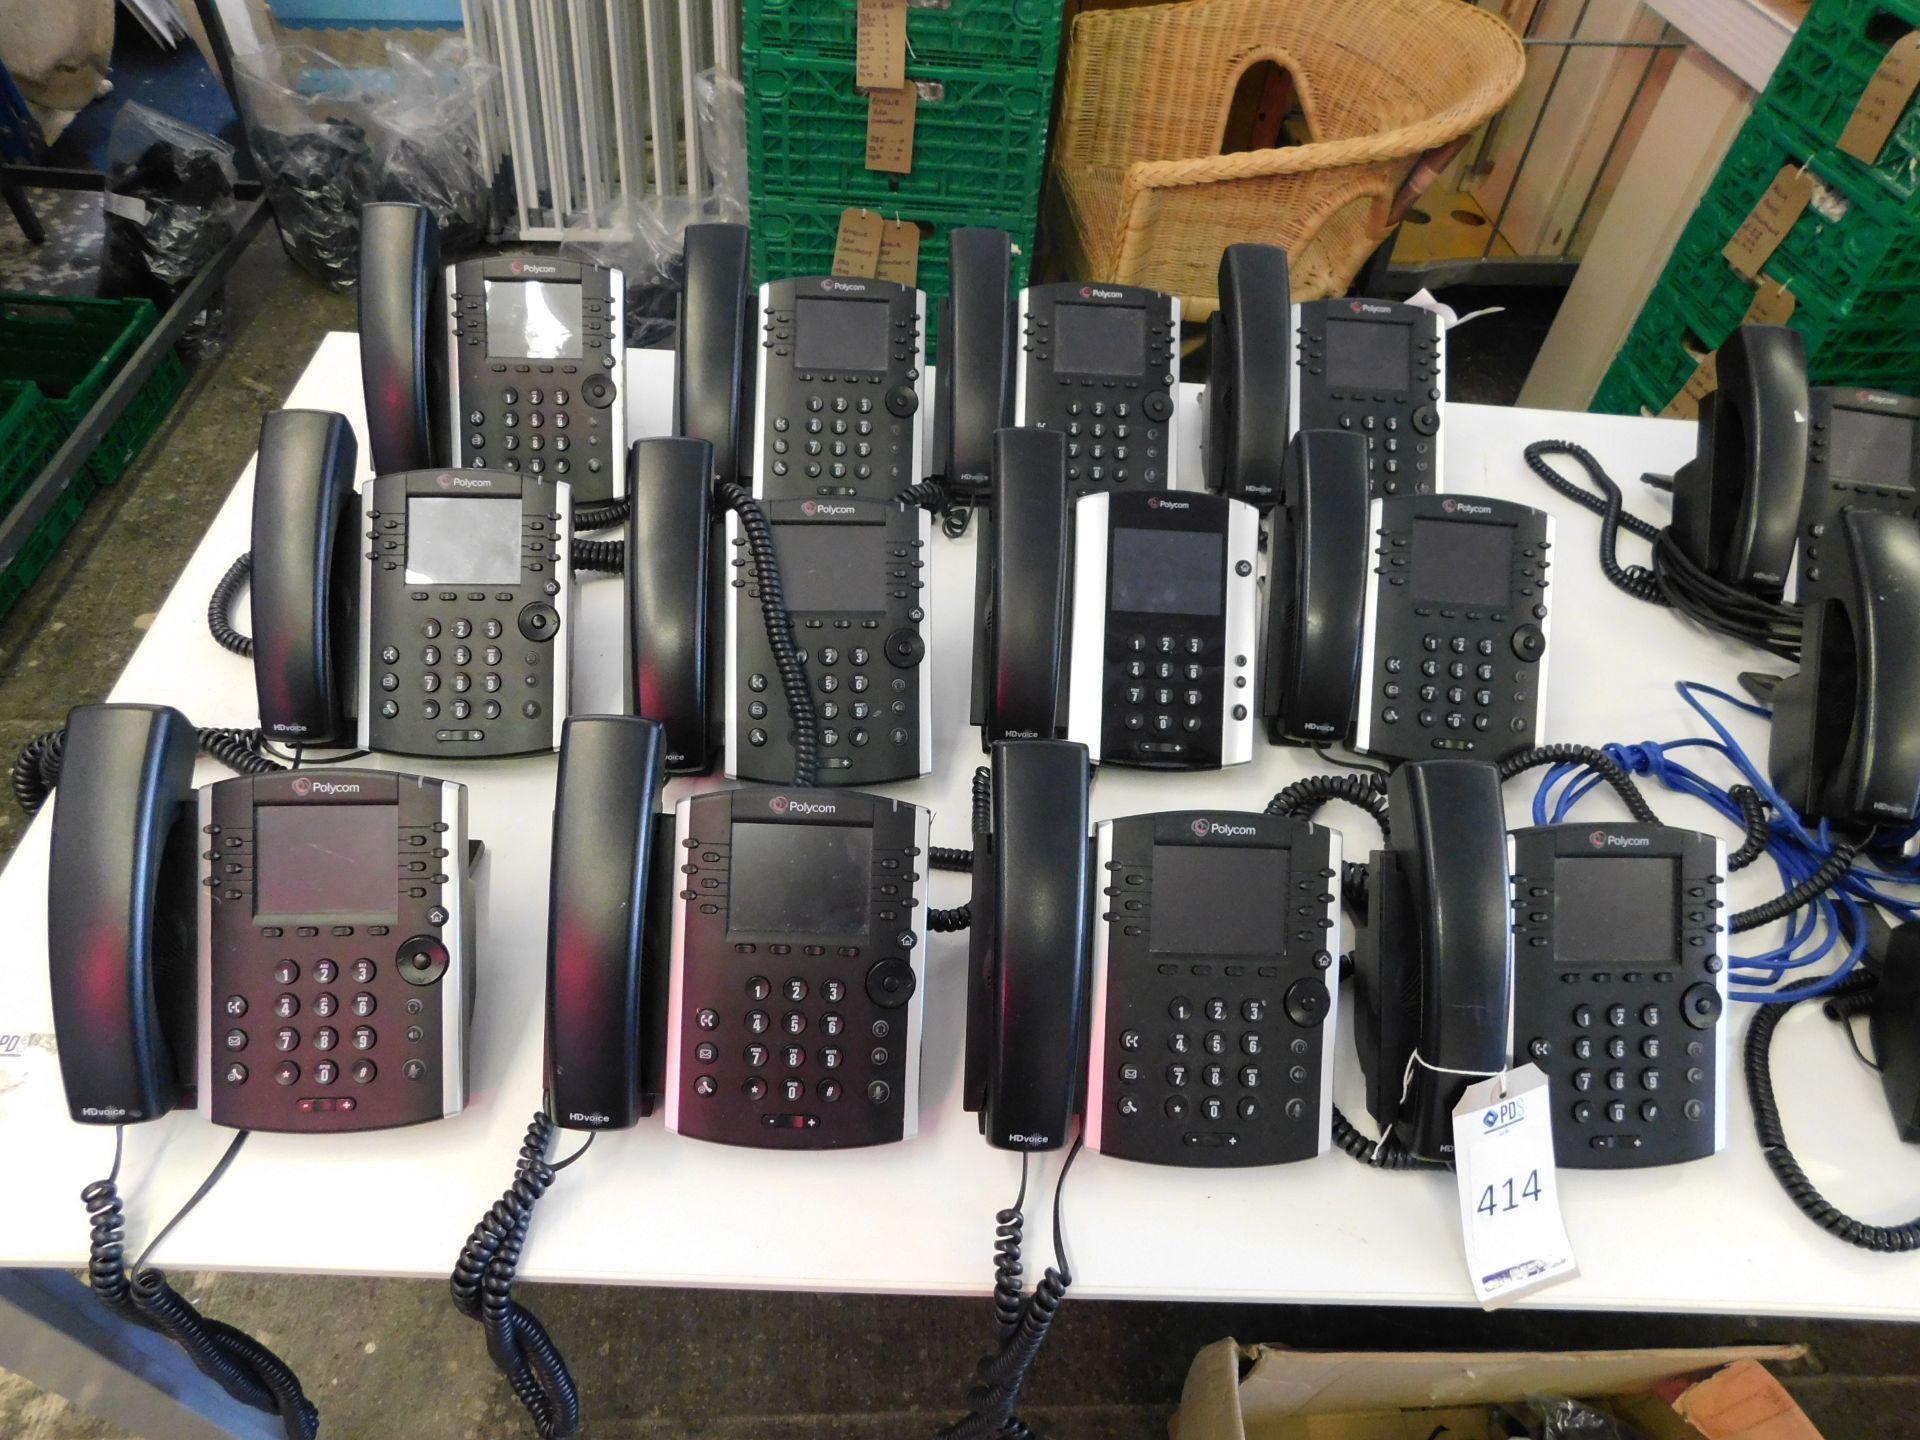 12 Polycom Telephone Handsets (Location Stockport. Please Refer to General Notes)